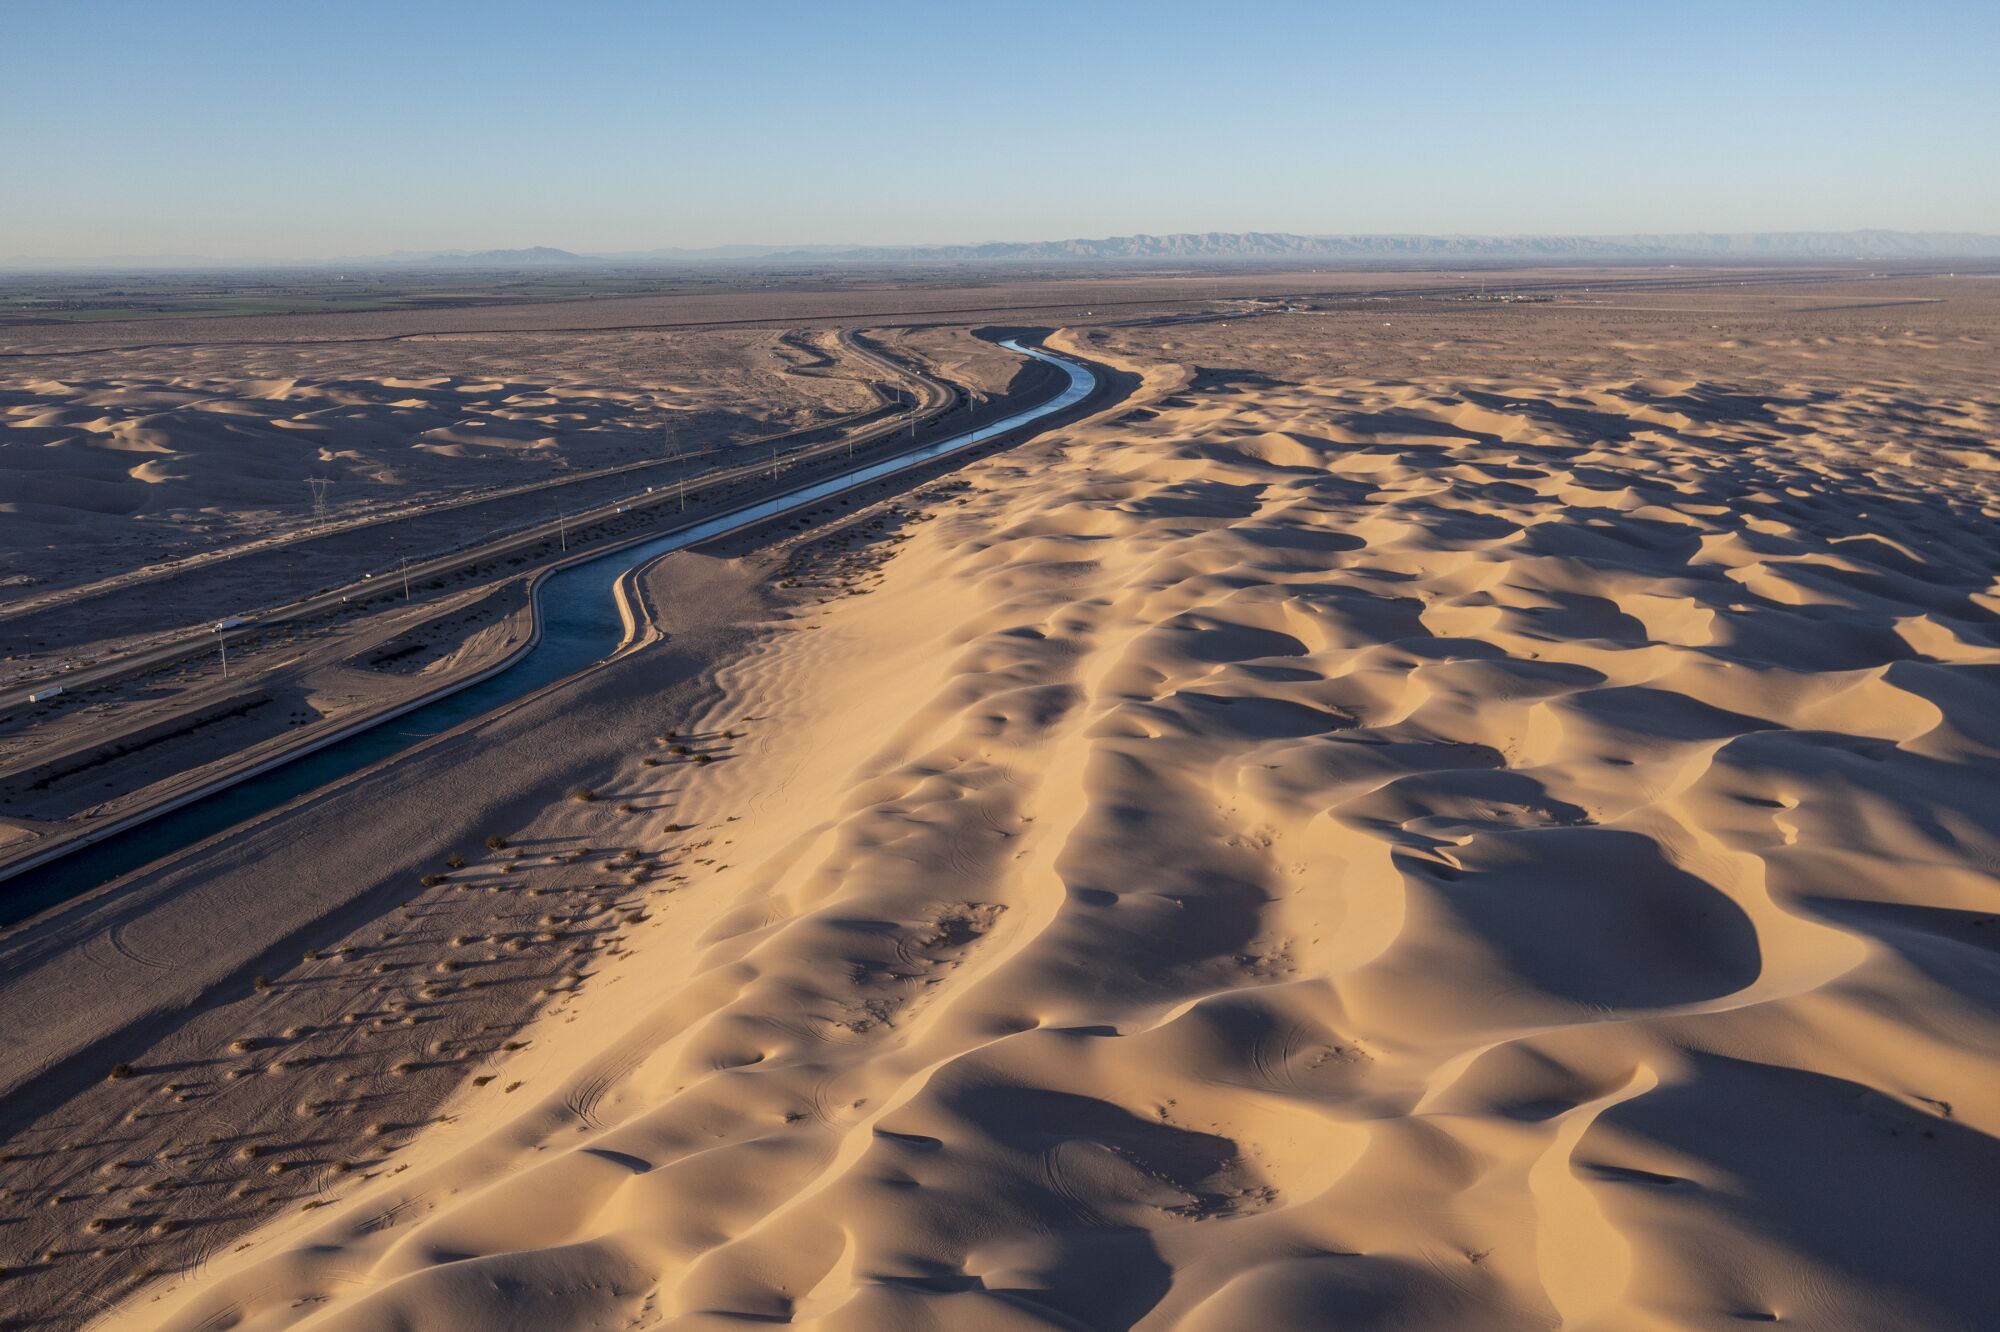 The All-American Canal slices through the Imperial Sand Dunes in Winterhaven, Calif.